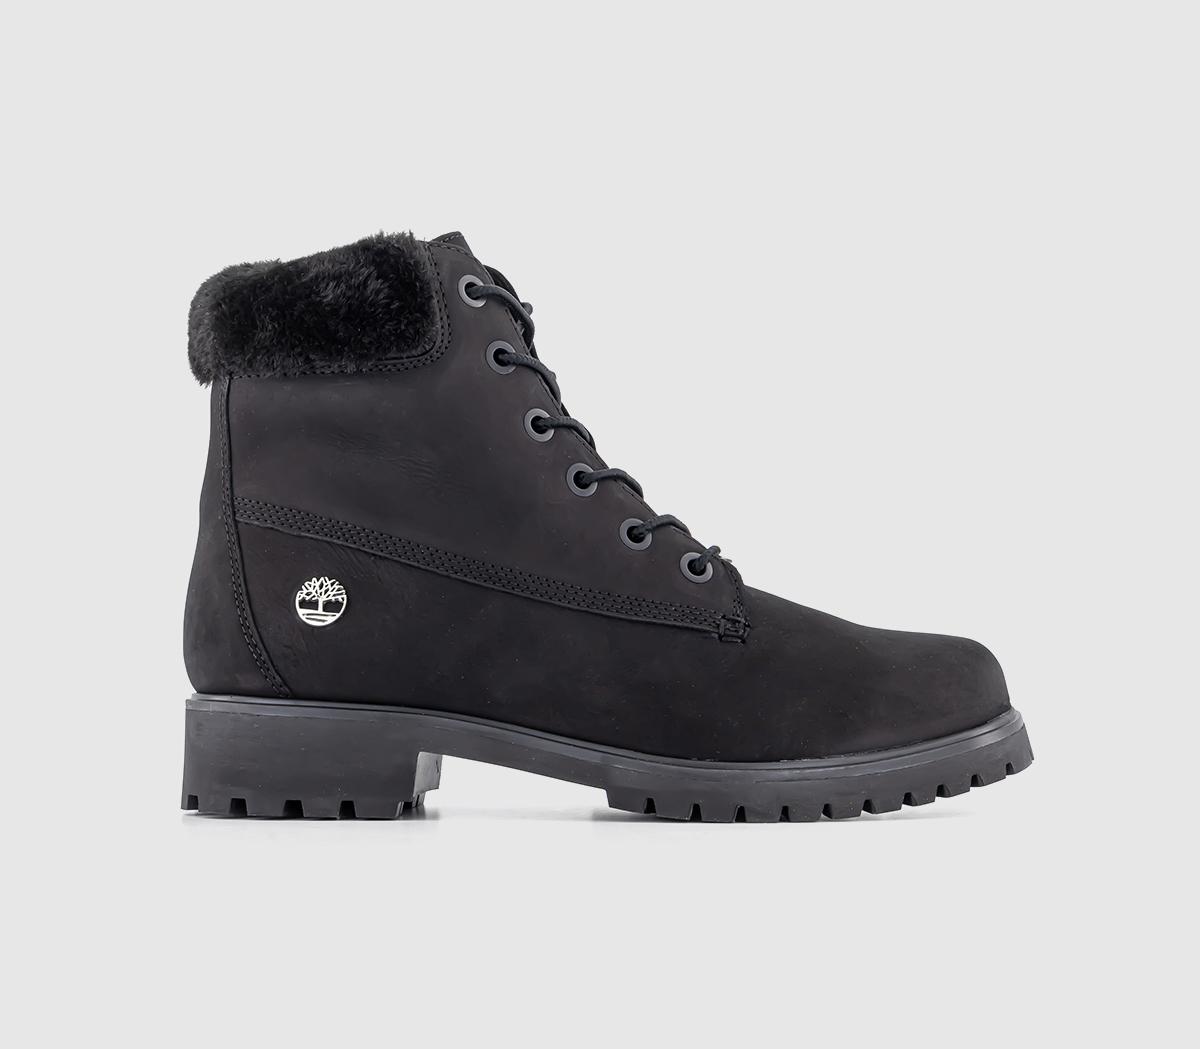 Timberland Lyonsdale Shearling Boots Black - Women's Ankle Boots